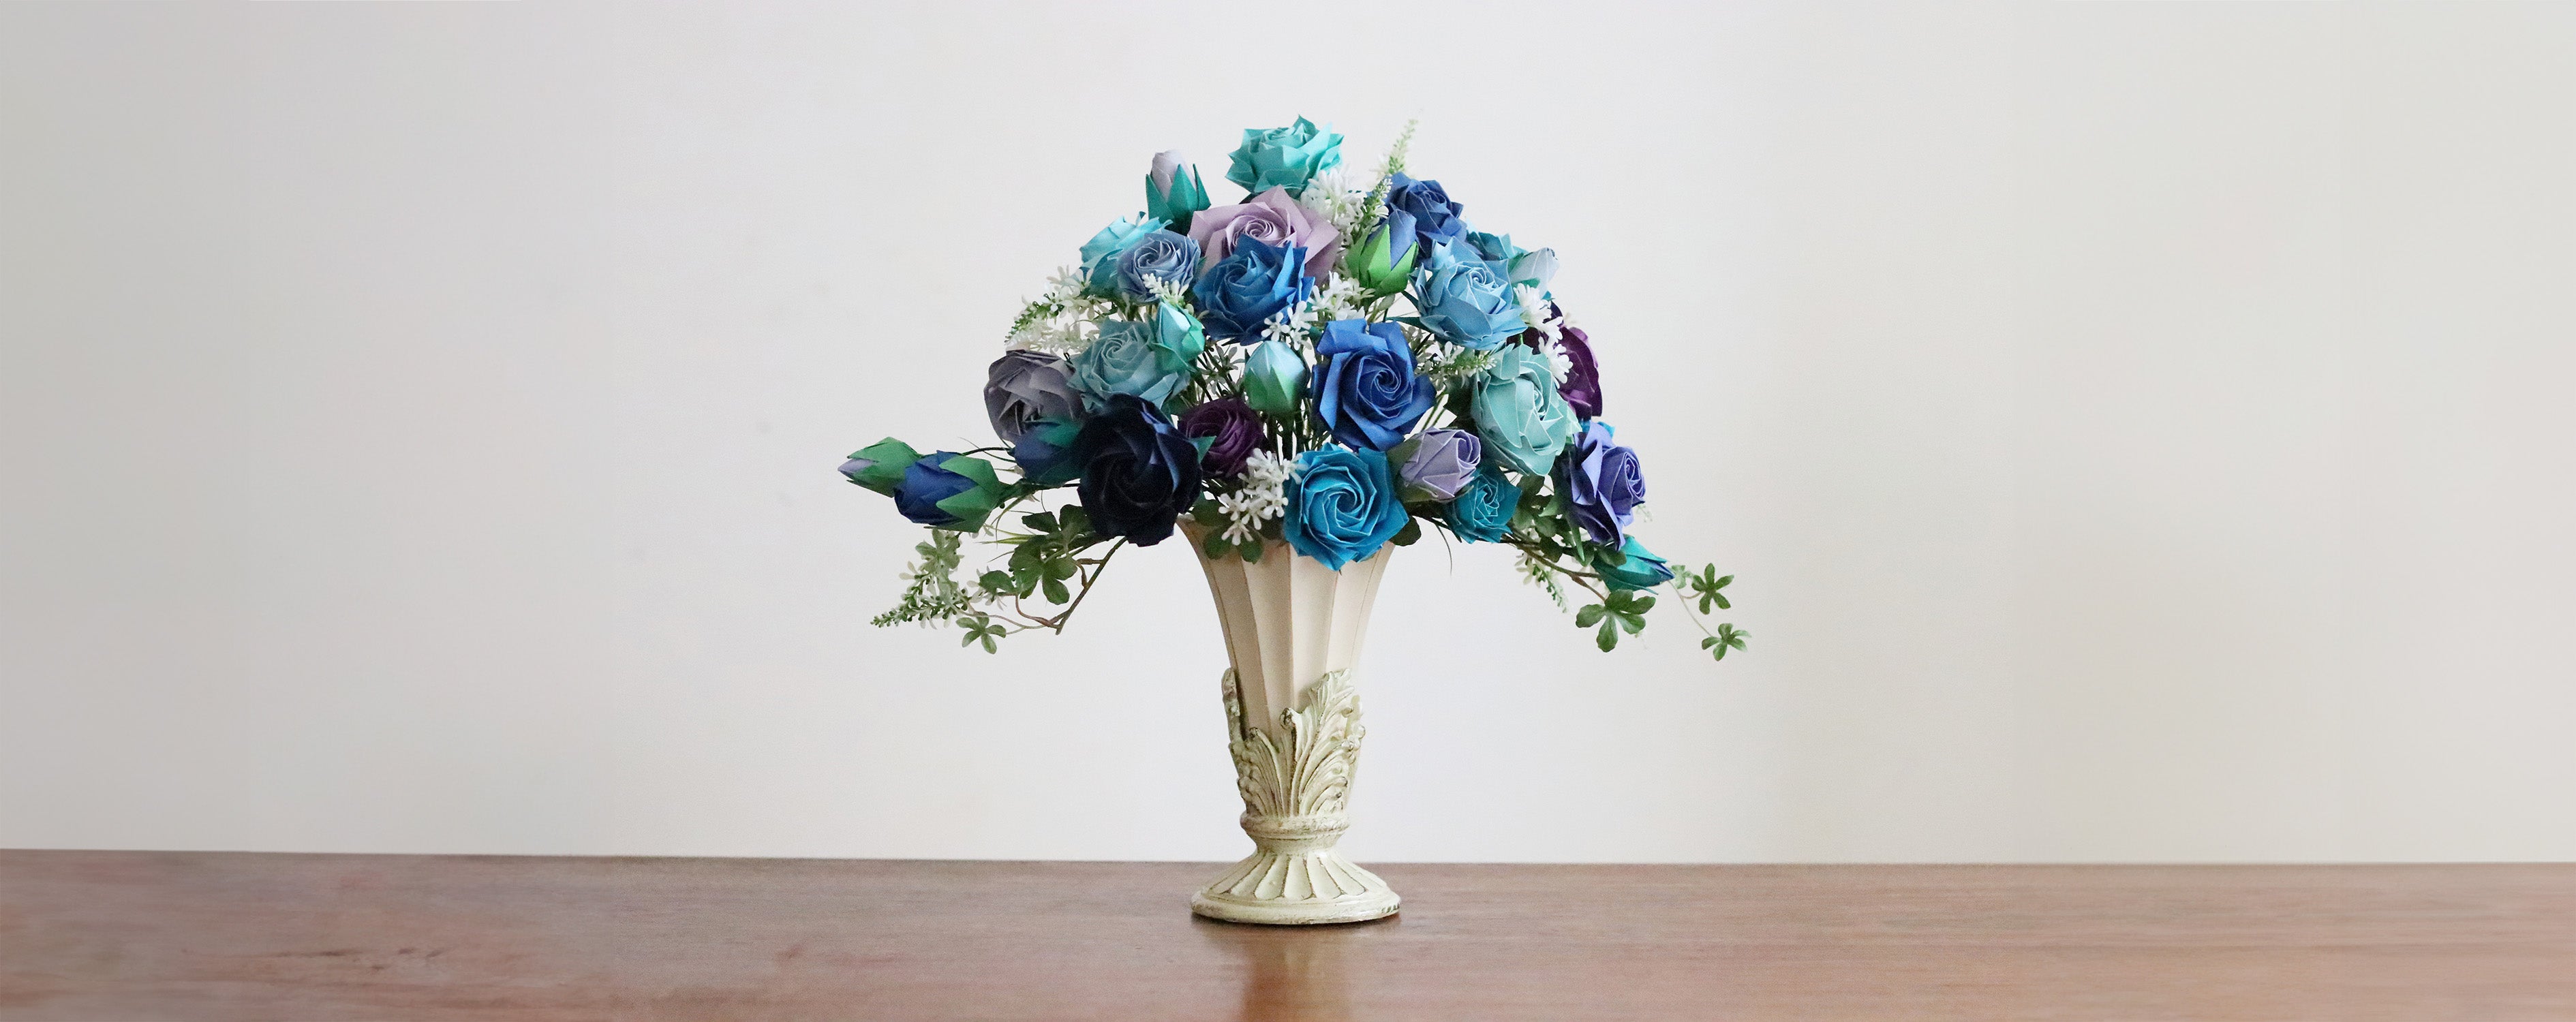 Photo of a Blue Bouquet. Used with Permission - Ako